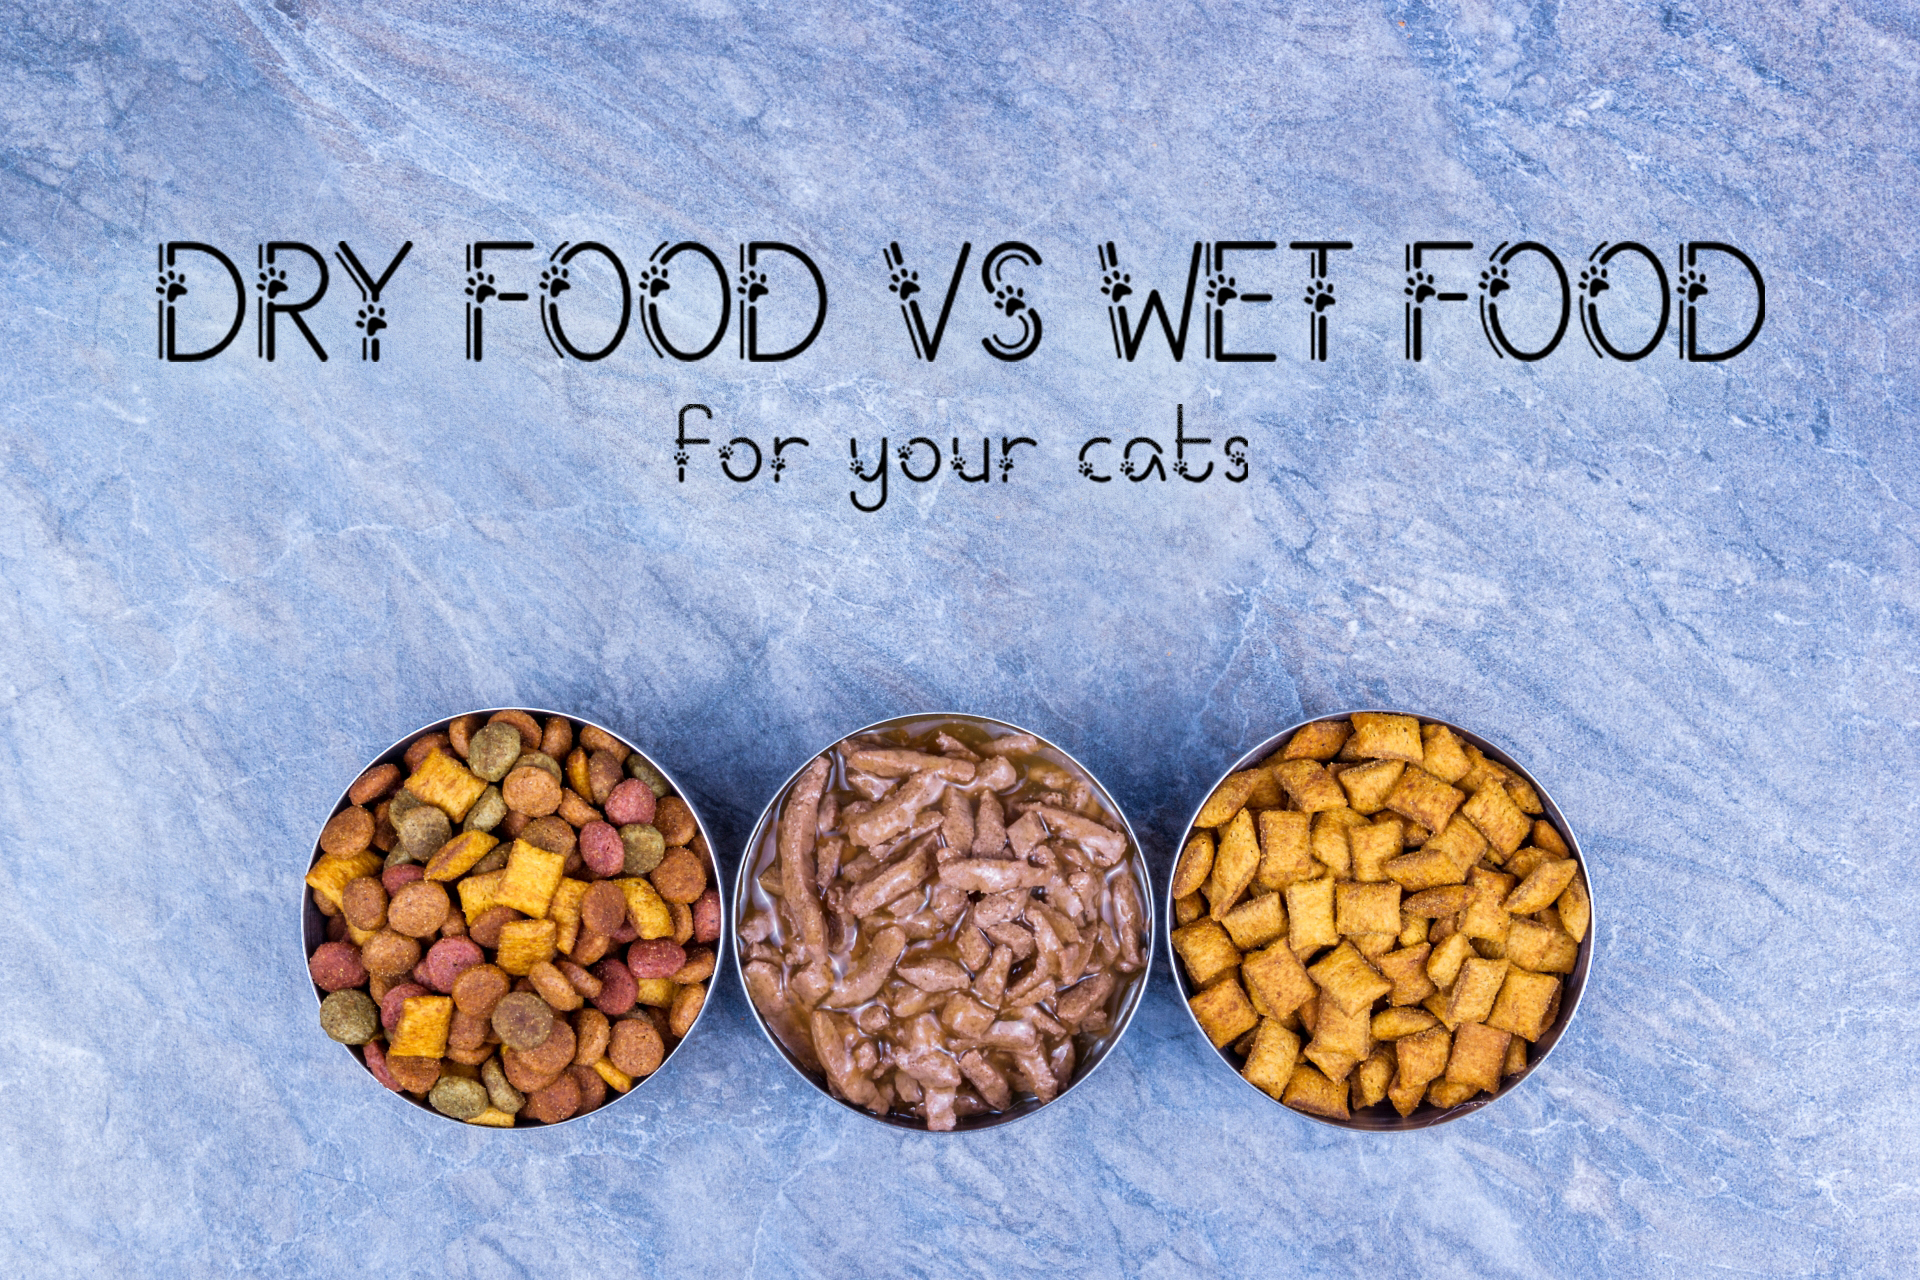 Wet Food vs. Dry Food for Cats